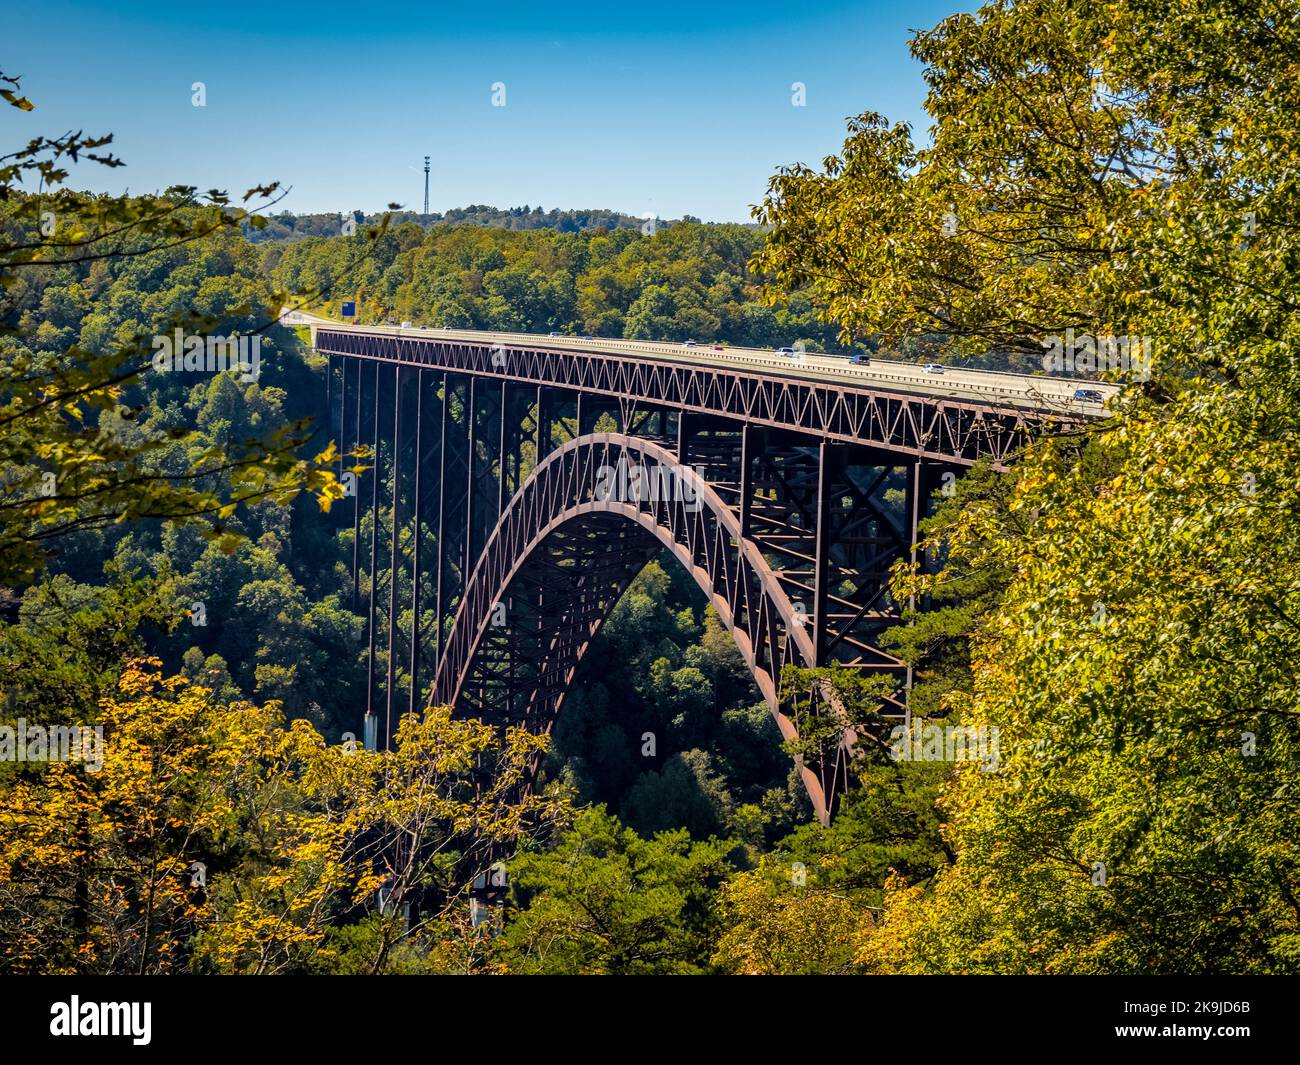 New River Gorge Bridge over the New River from the observation platform in the New River Gorge National Park and Preserve in West Virginia USA Stock Photo